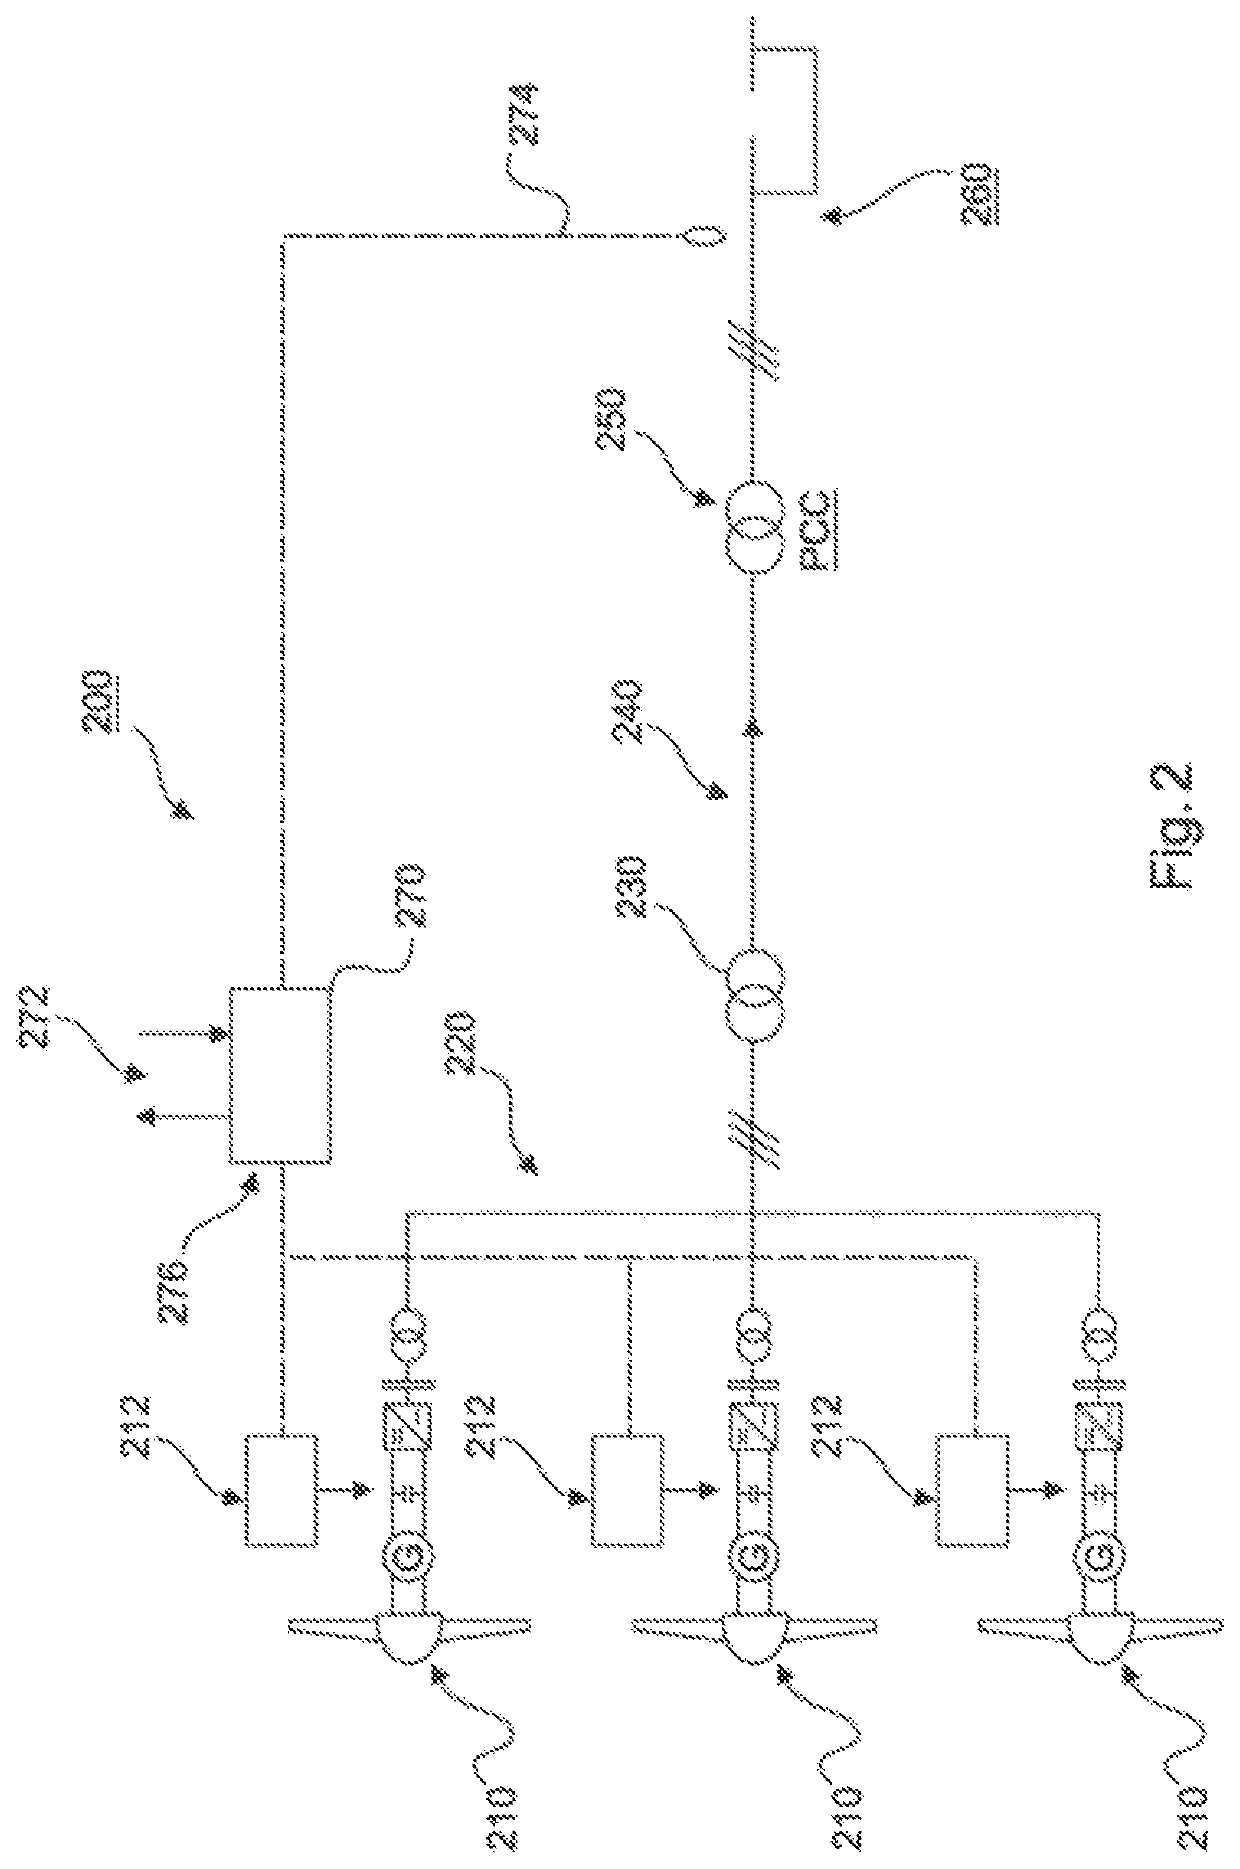 Method for controlling an electrical distribution network